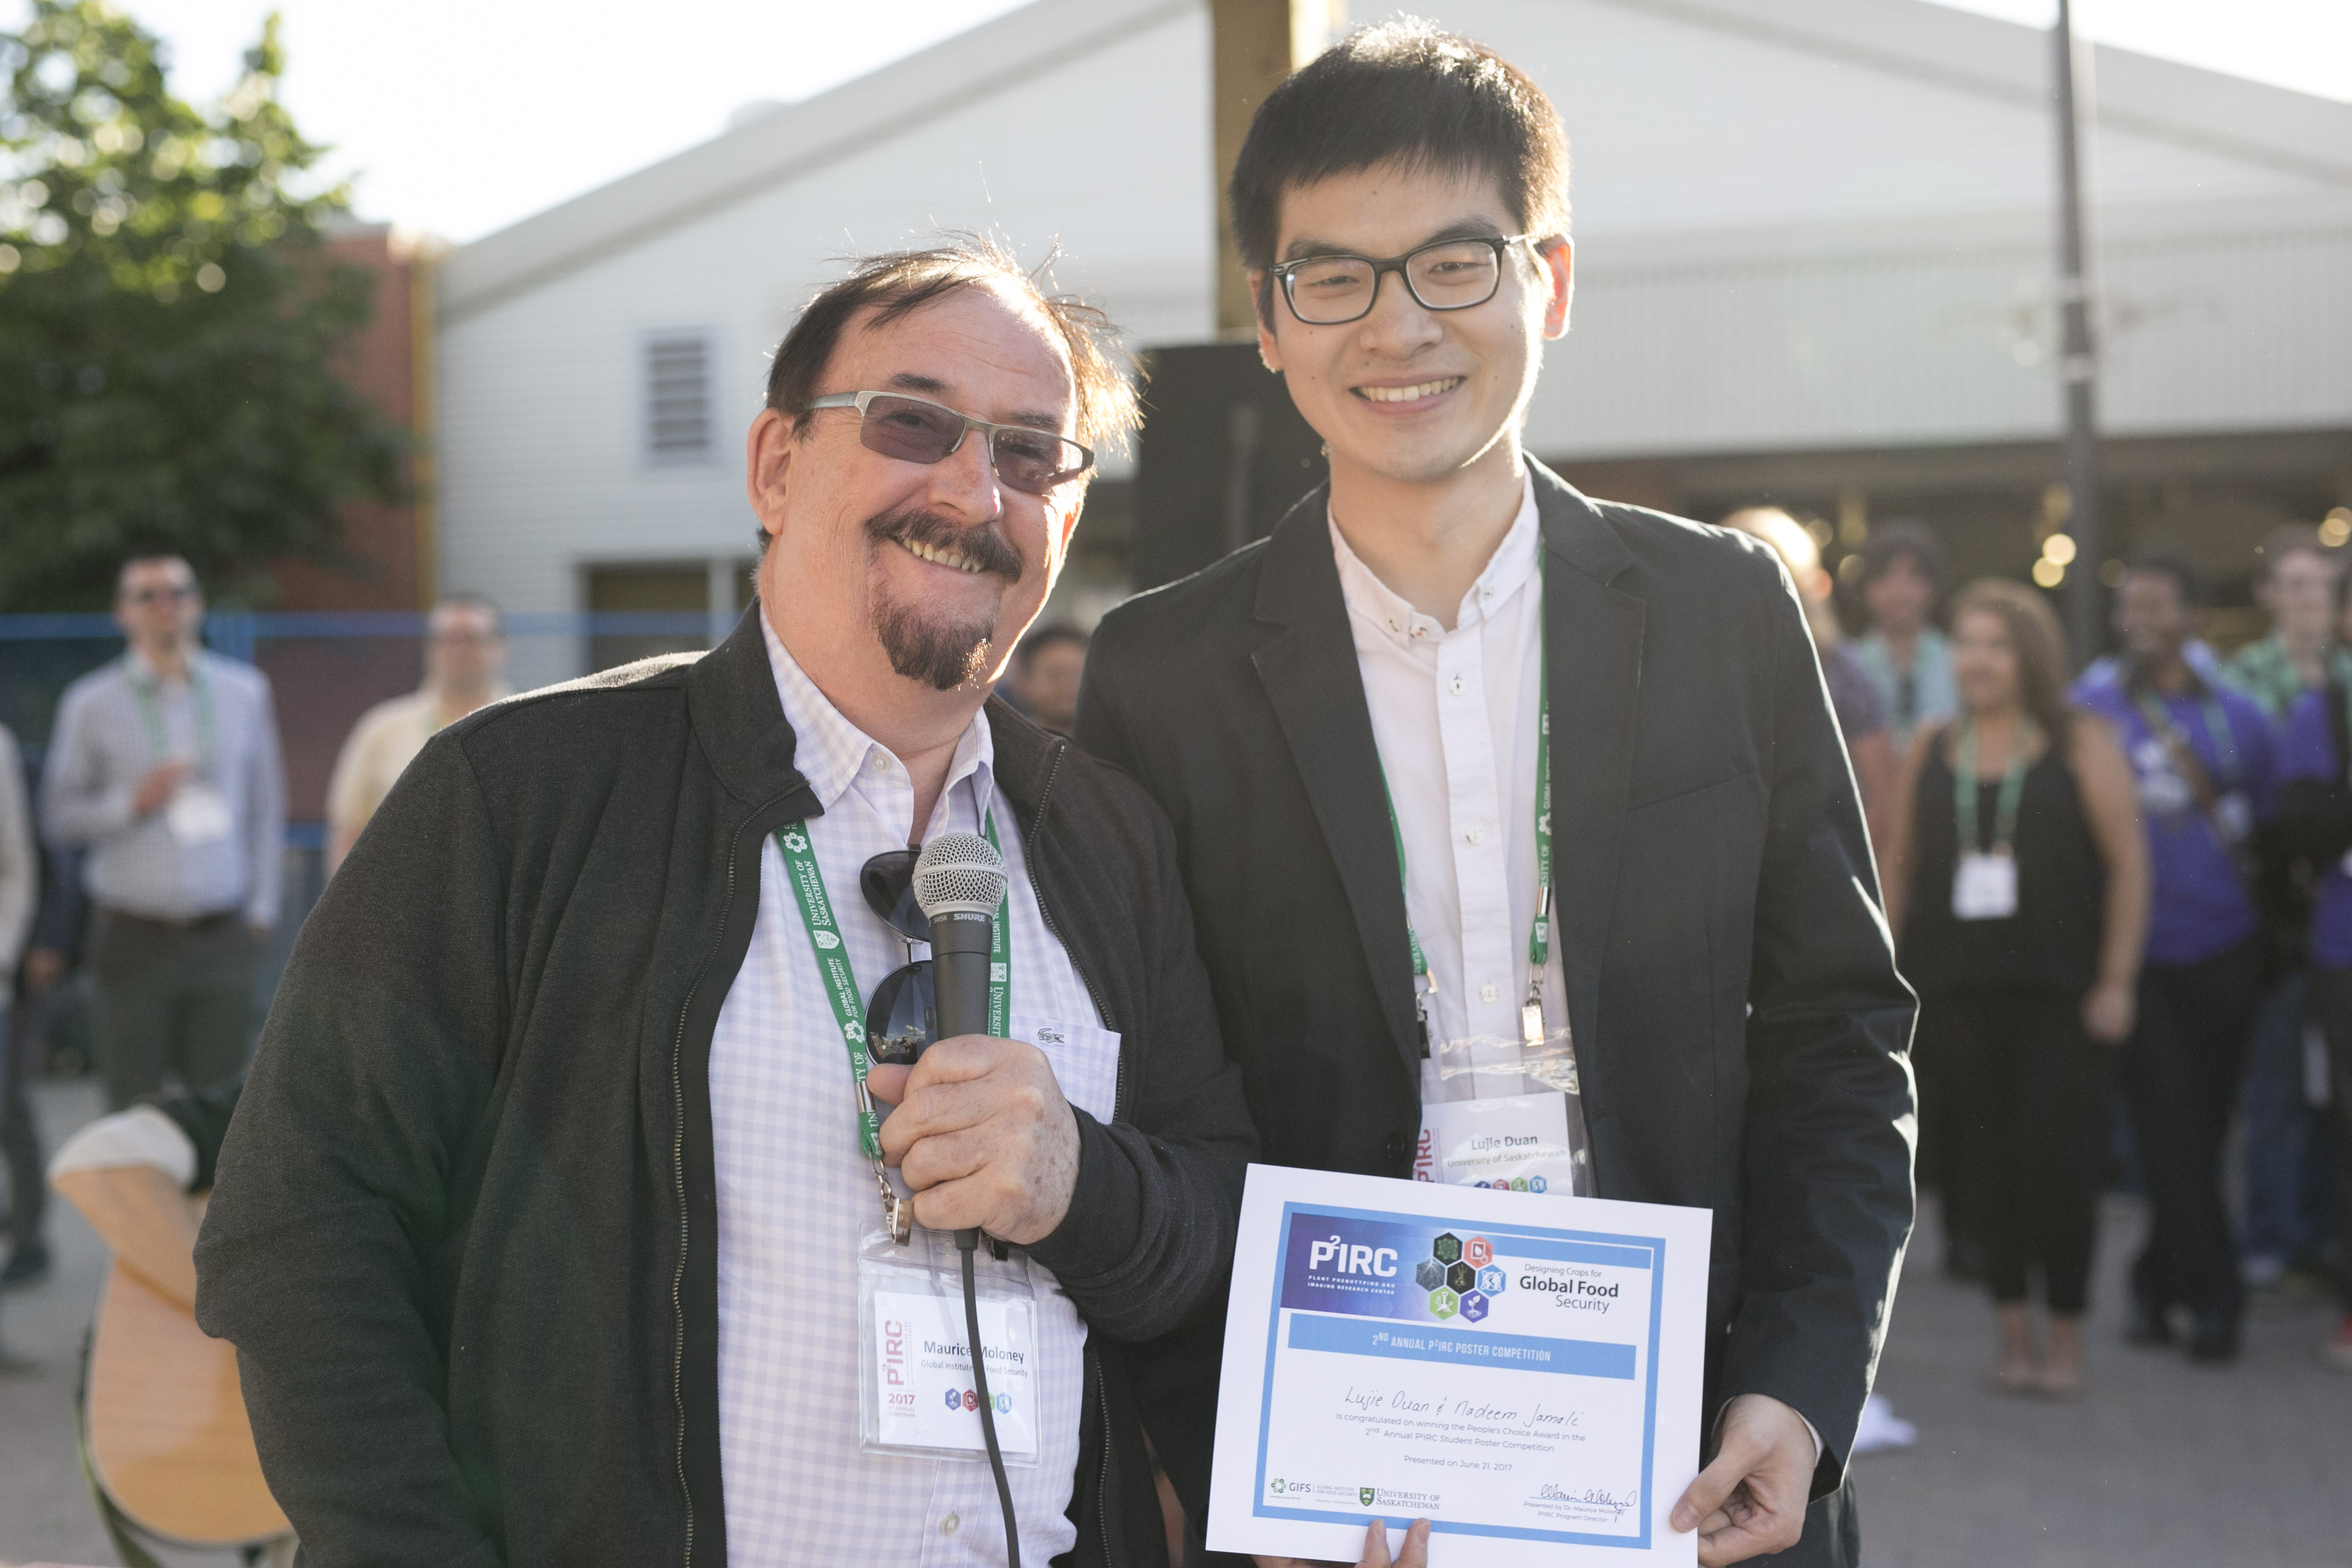 Lujie Duan receives the People’s Choice Award in the P2IRC Student Poster Competition.